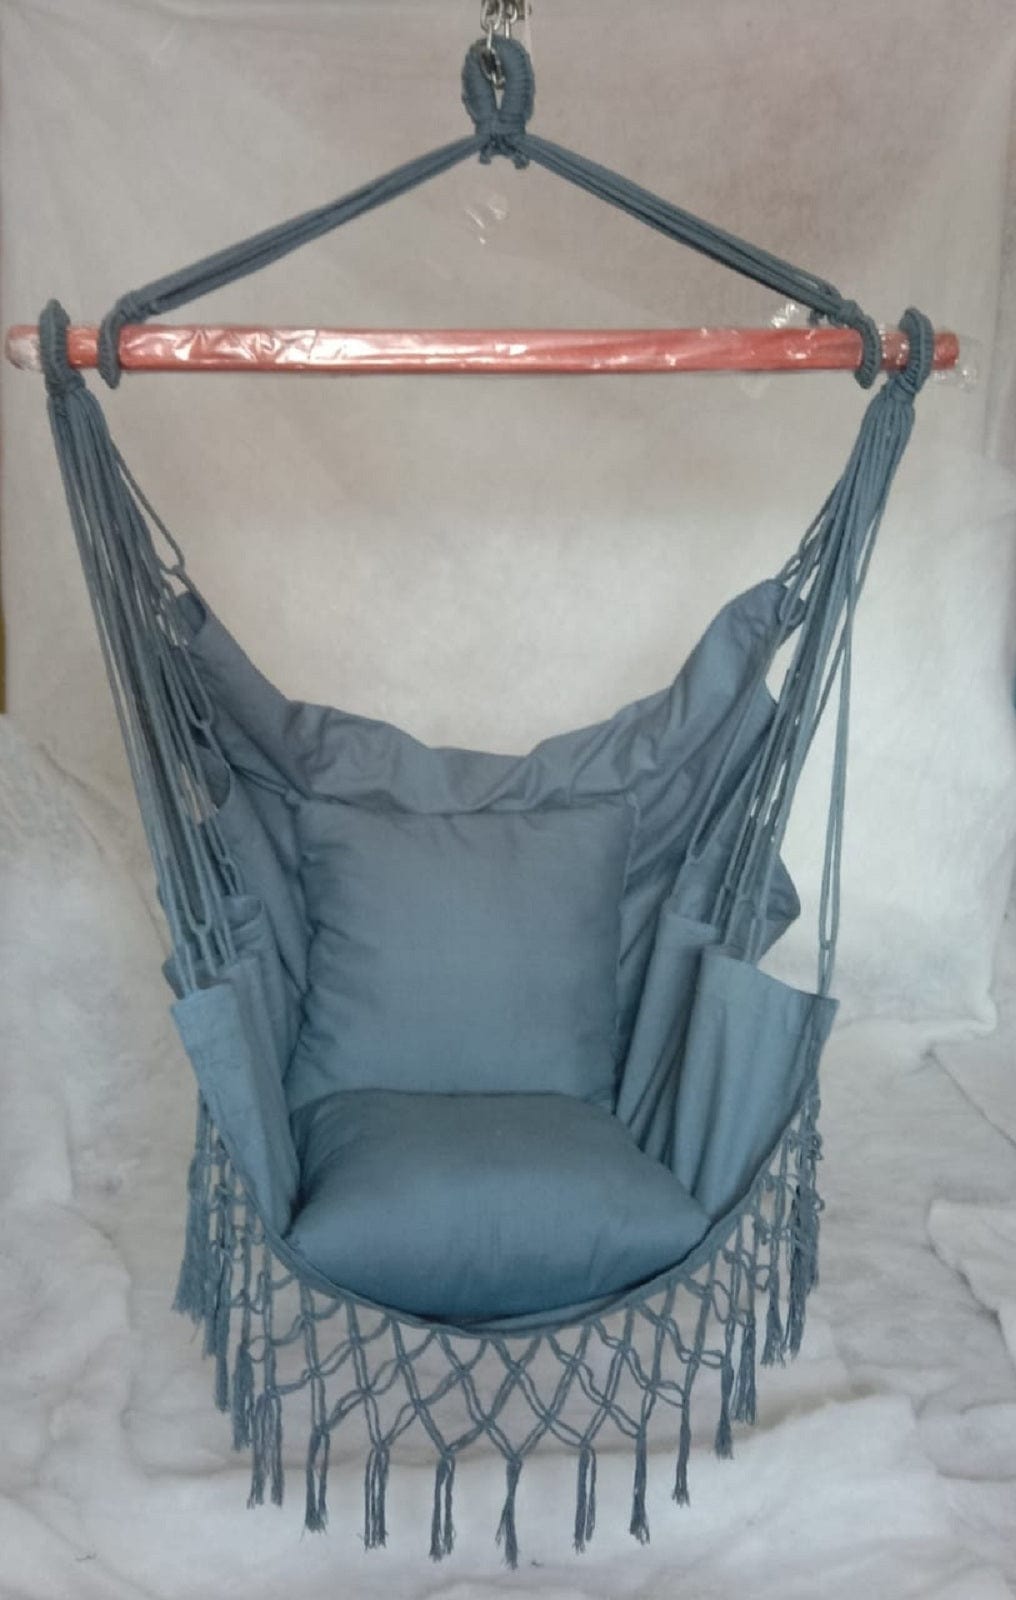 Macrame Swing Chair With Deco Fringes and Cushions